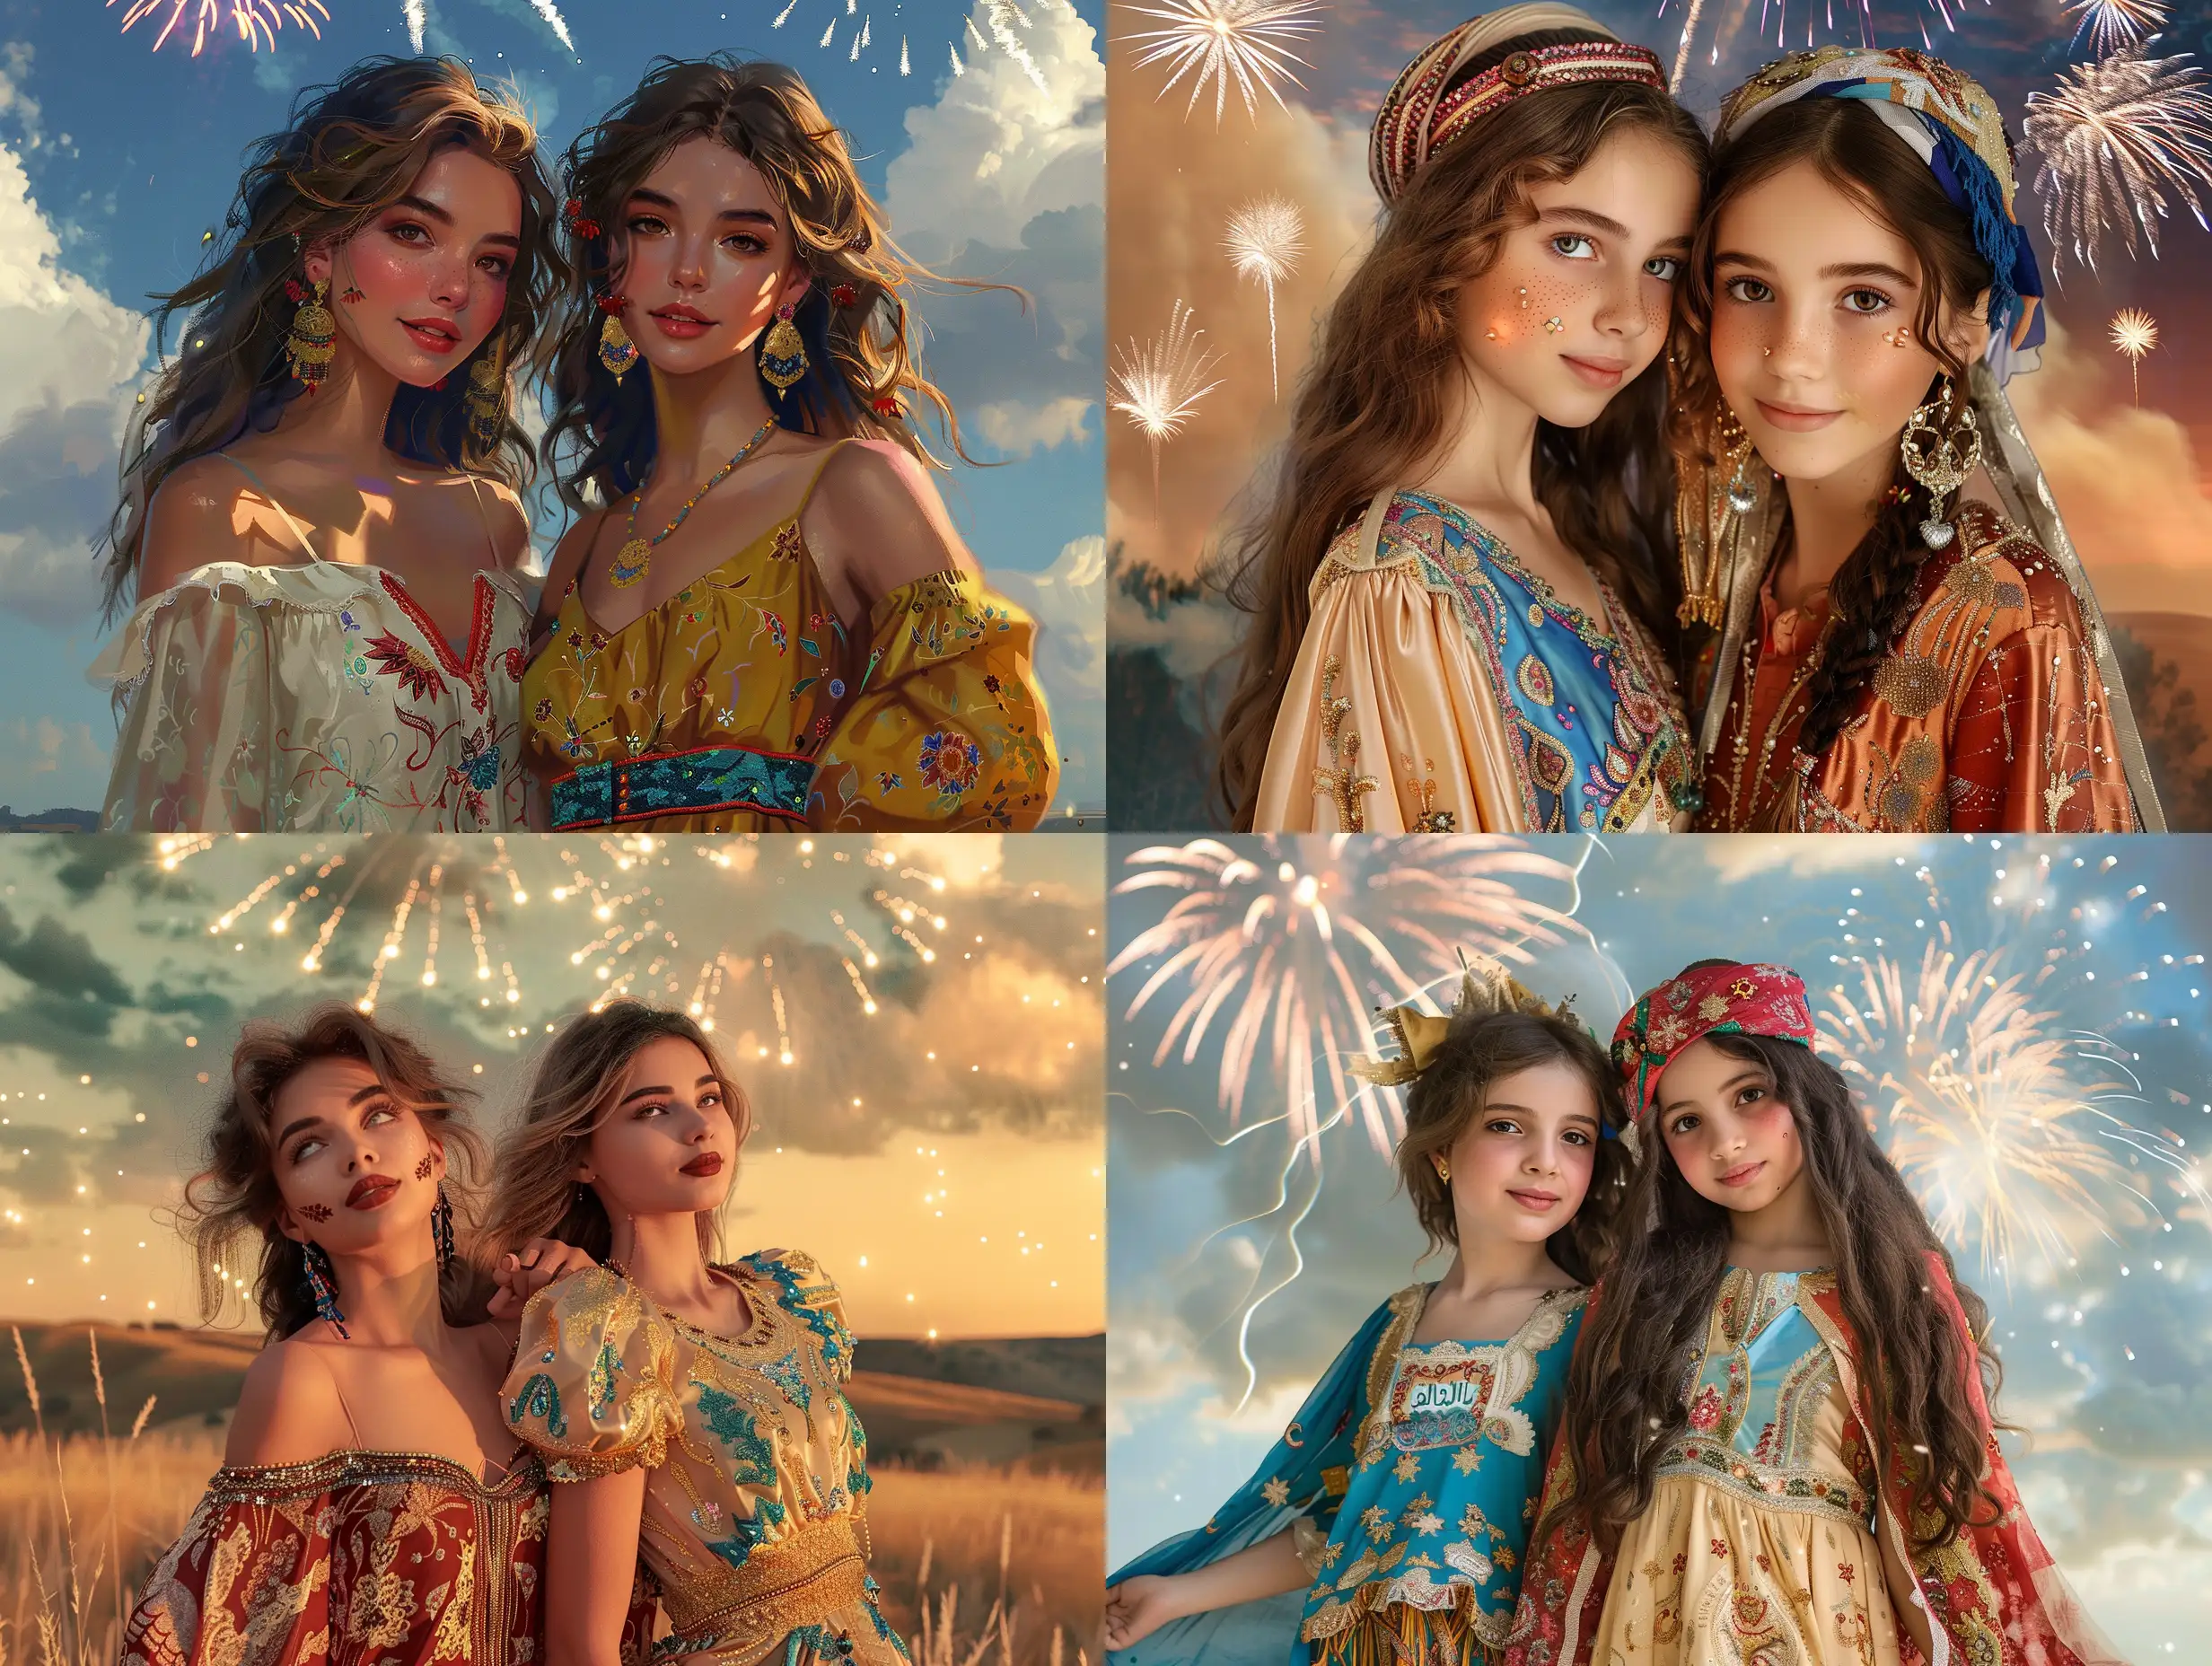 Two girls with Arab features wearing Eid clothes, their dresses are bright in a European style, one Gypsy month, happy with Eid, and fireworks decorate the sky in an extremely beautiful and very realistic overhead scene., Portrait, Realism, Keyshot, Normal perspective, Mirrorless Camera, Natural Light, Delight,

